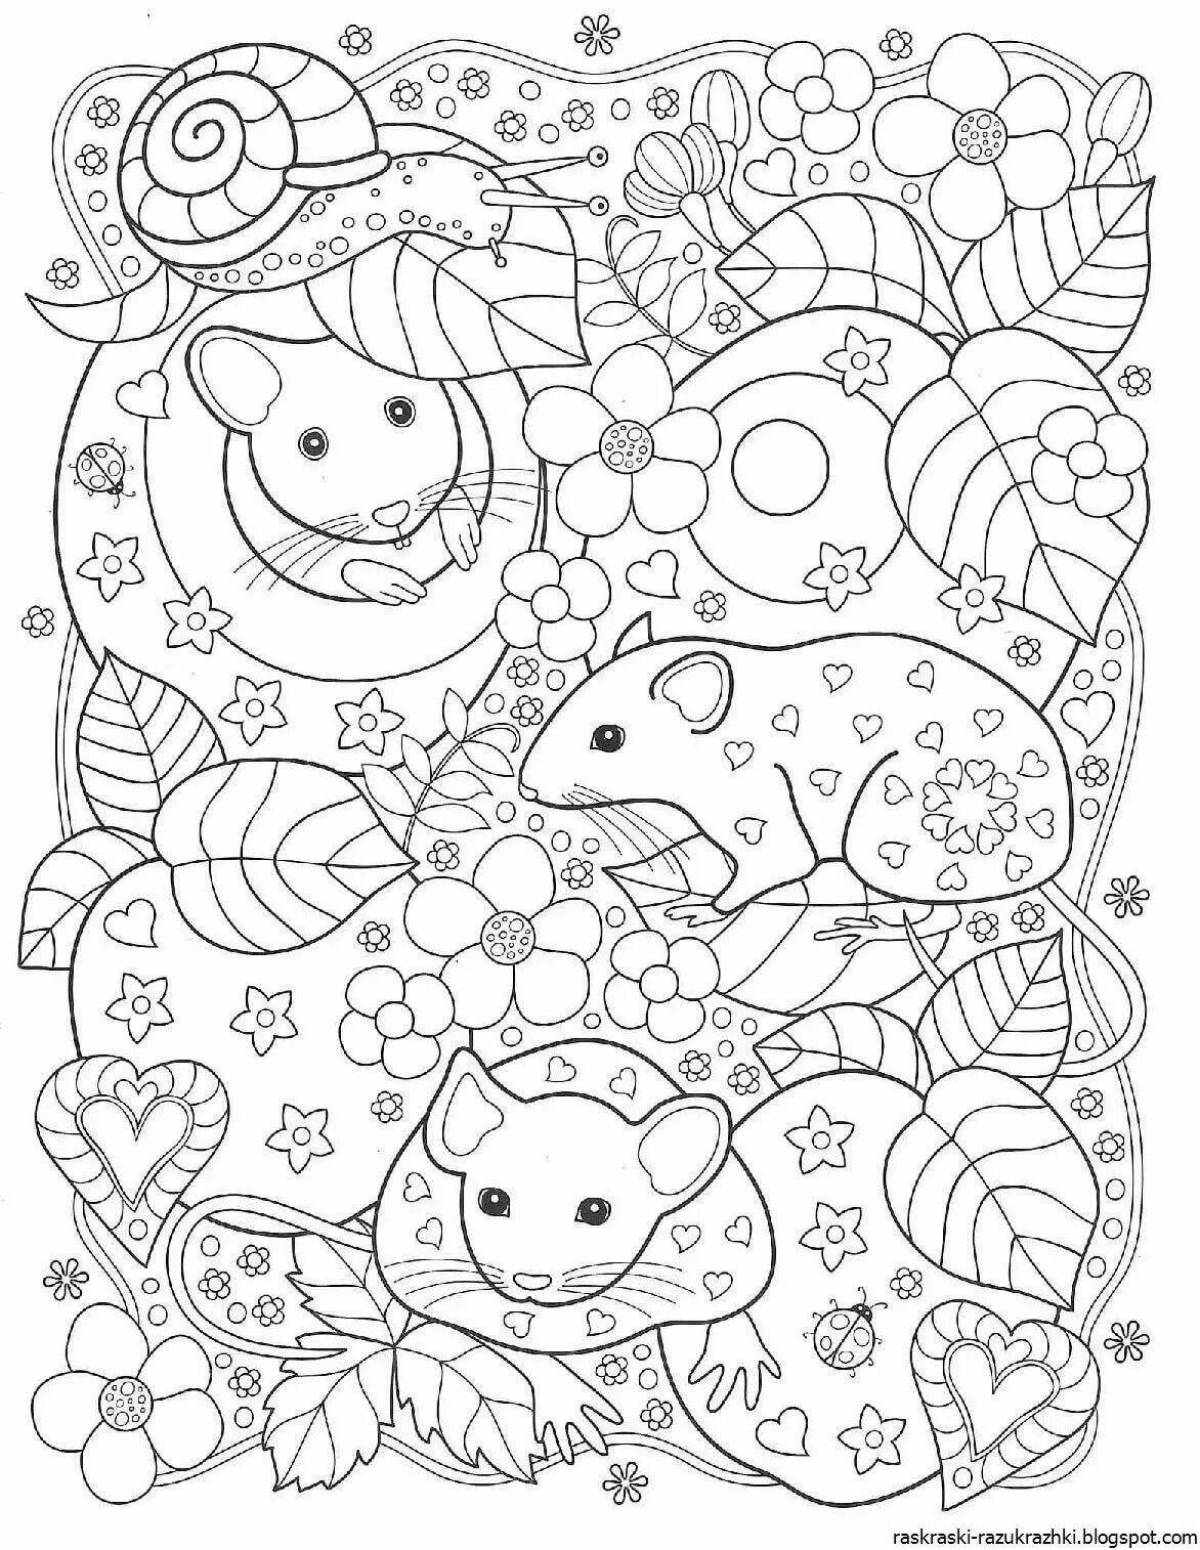 Animals anti-stress coloring book for girls